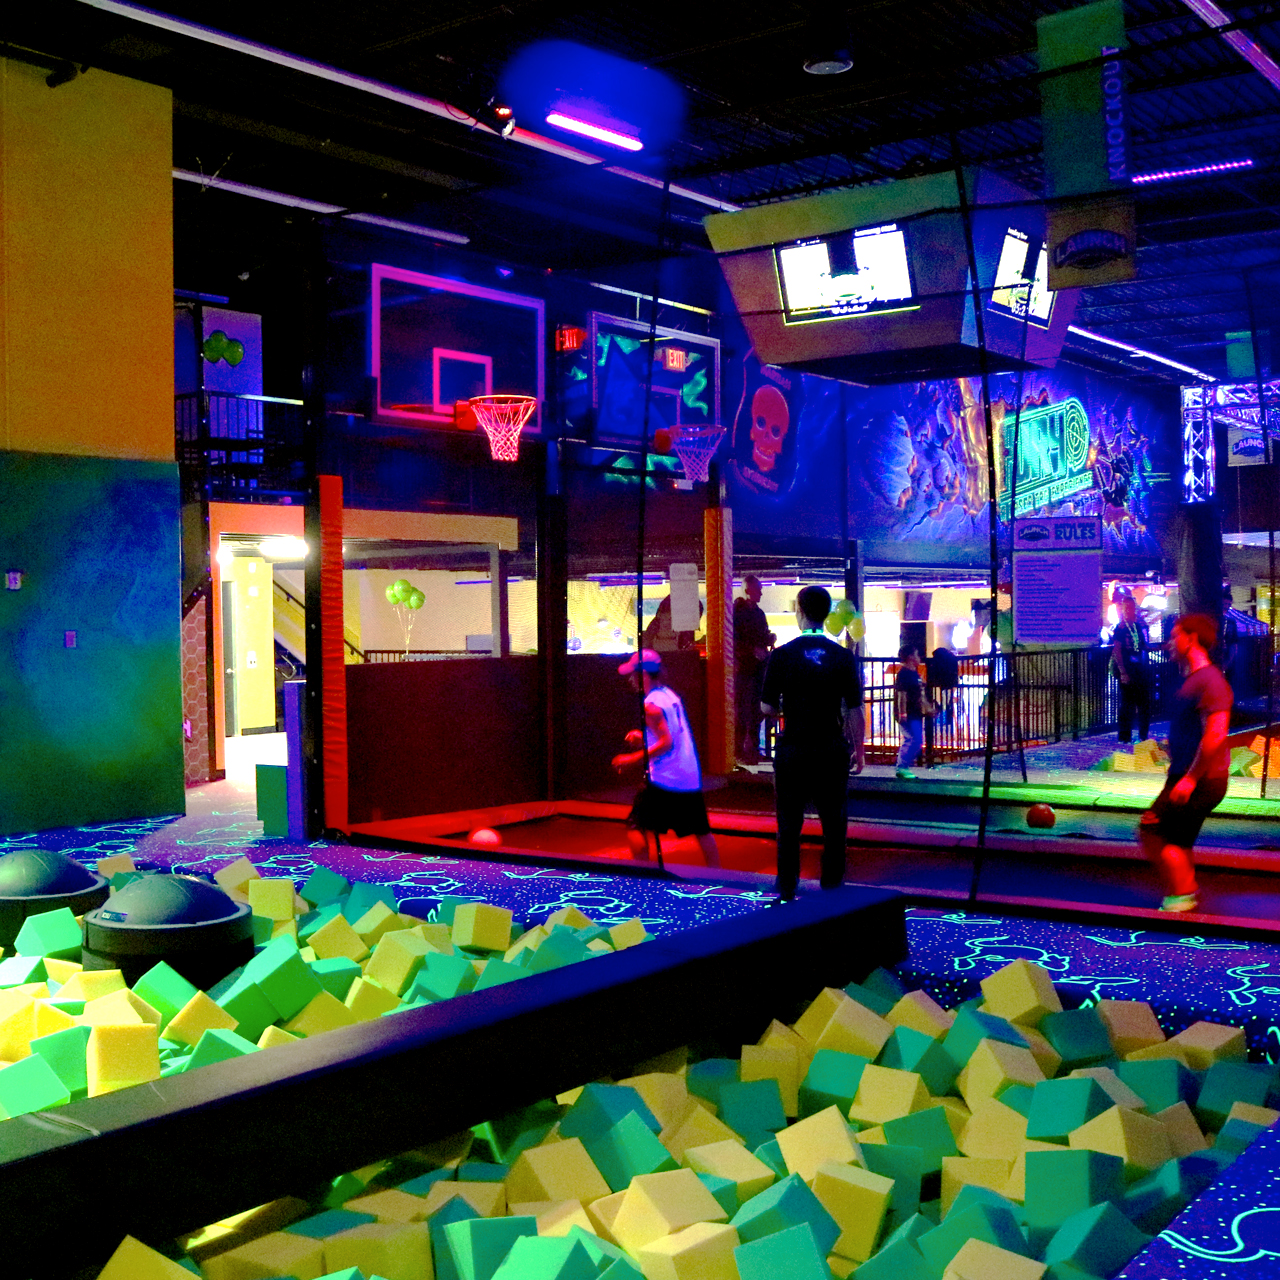 TRAMPOLINE PARK FRANCHISE: GOOD INVESTMENT? HERE’S WHAT TO EXPECT